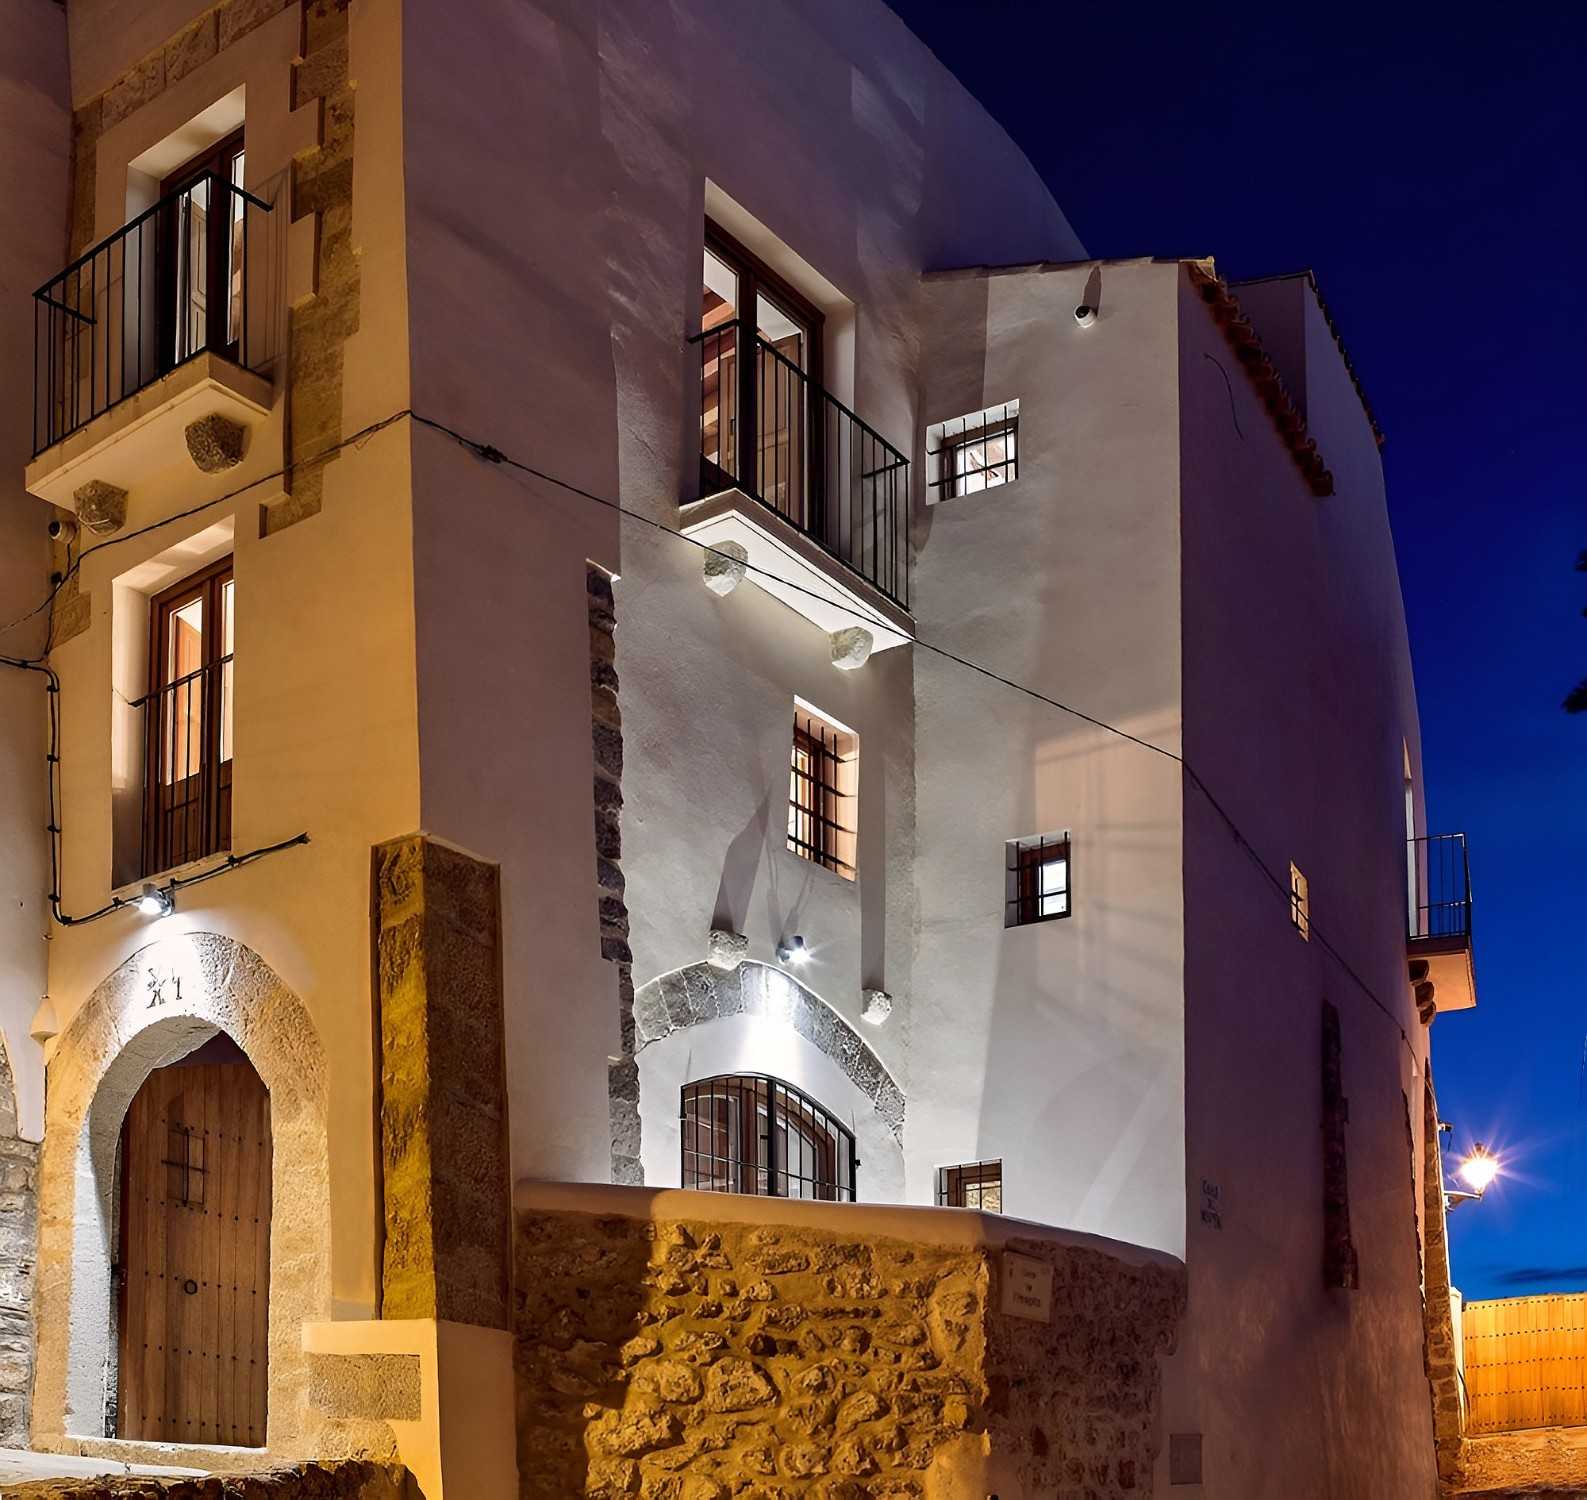 Bilder XI 'Eleven' - Ibiza Trophy - A Unique Heritage Property (UNESCO) In the Heart of Old Town